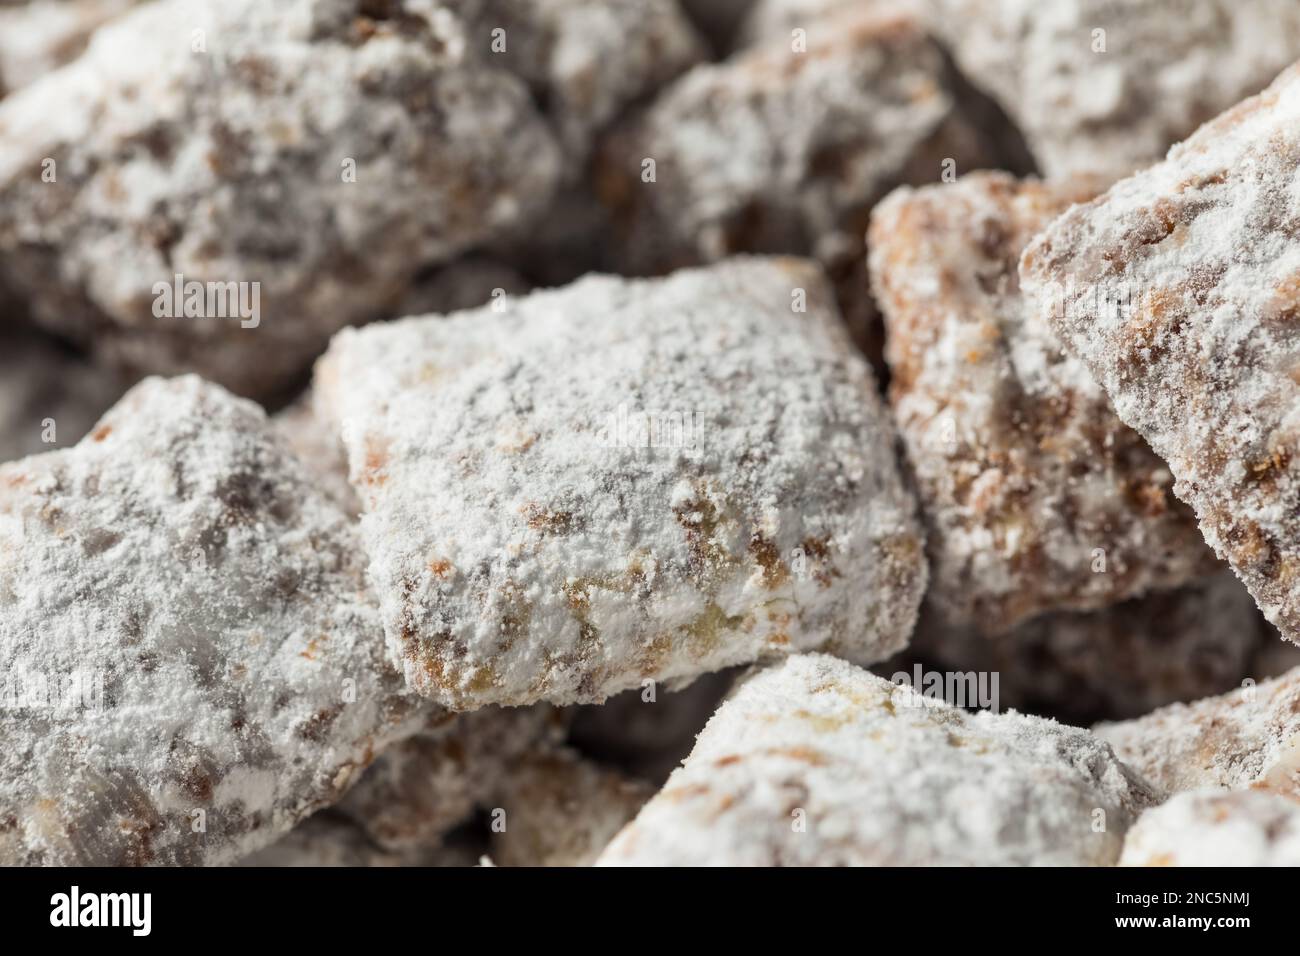 Homemade Sweet Muddy Buddy Puppy Chow with Peanut Butter and Chocolate Stock Photo